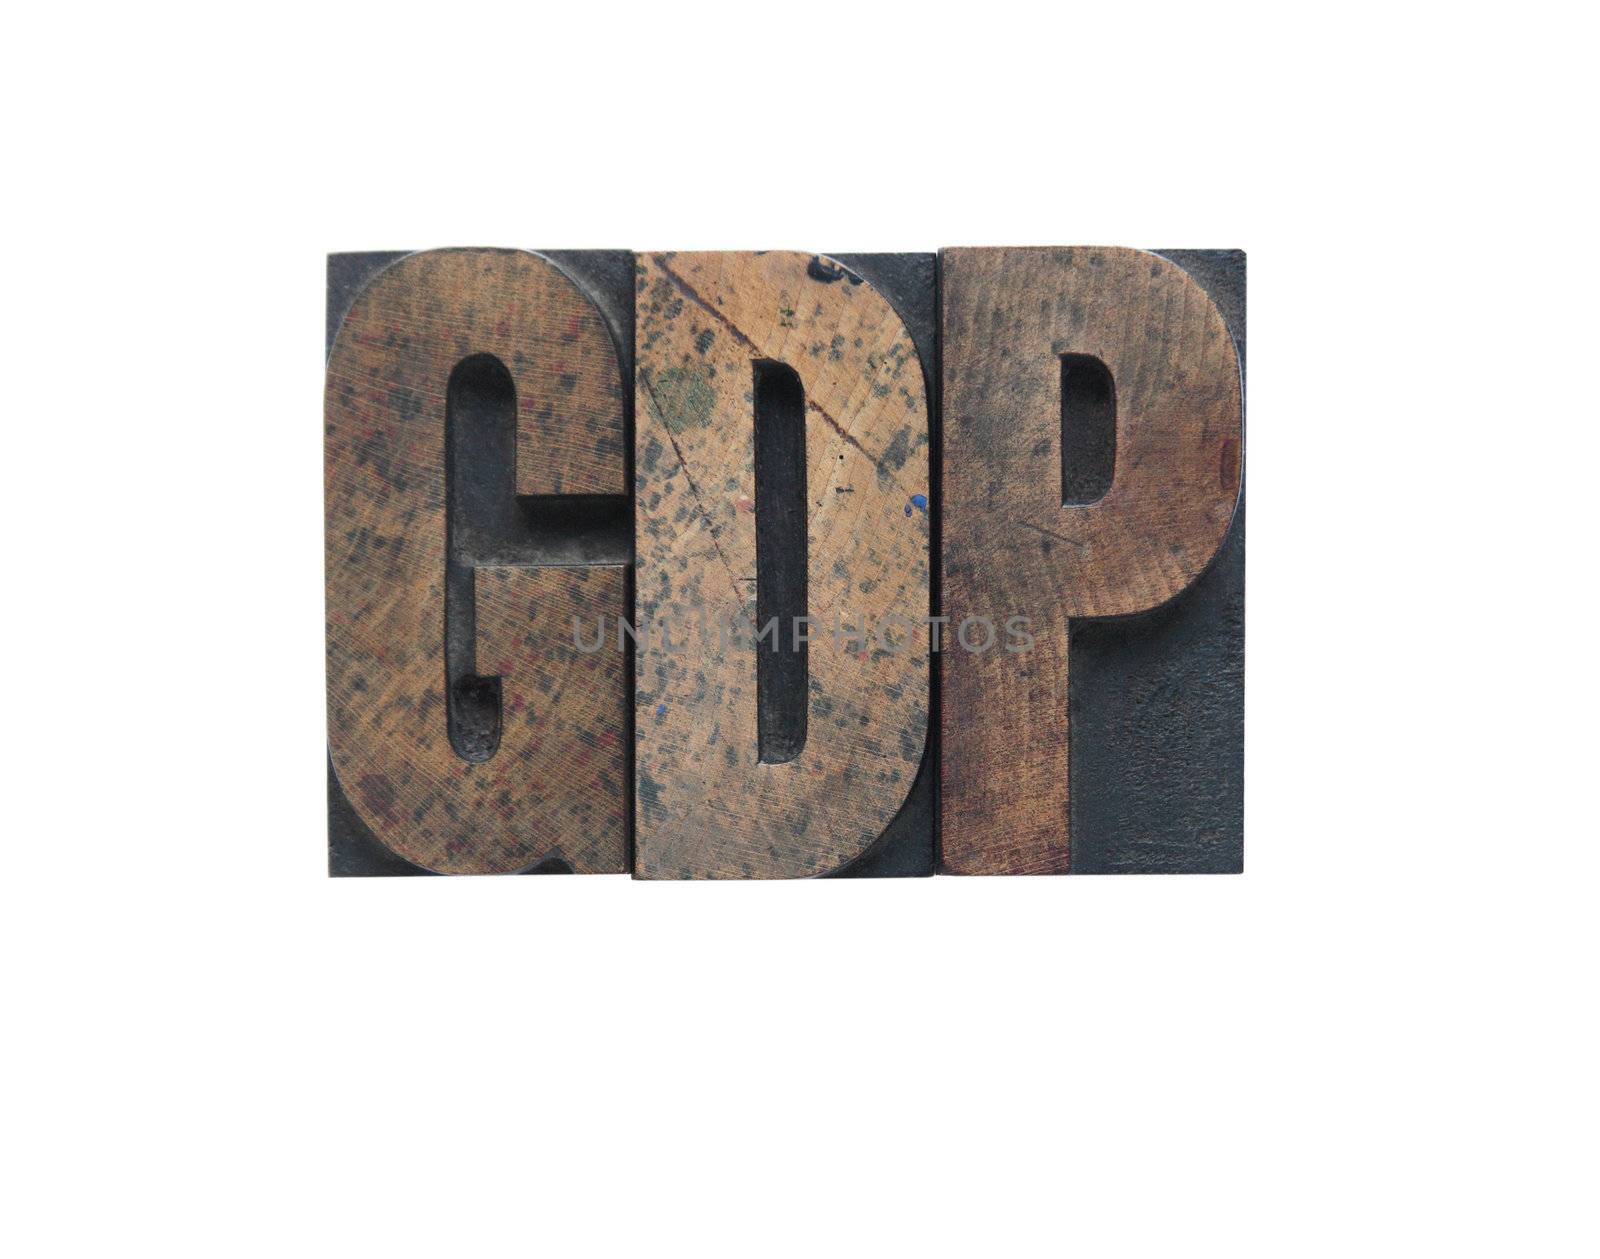 the term 'GDP' in old wood type